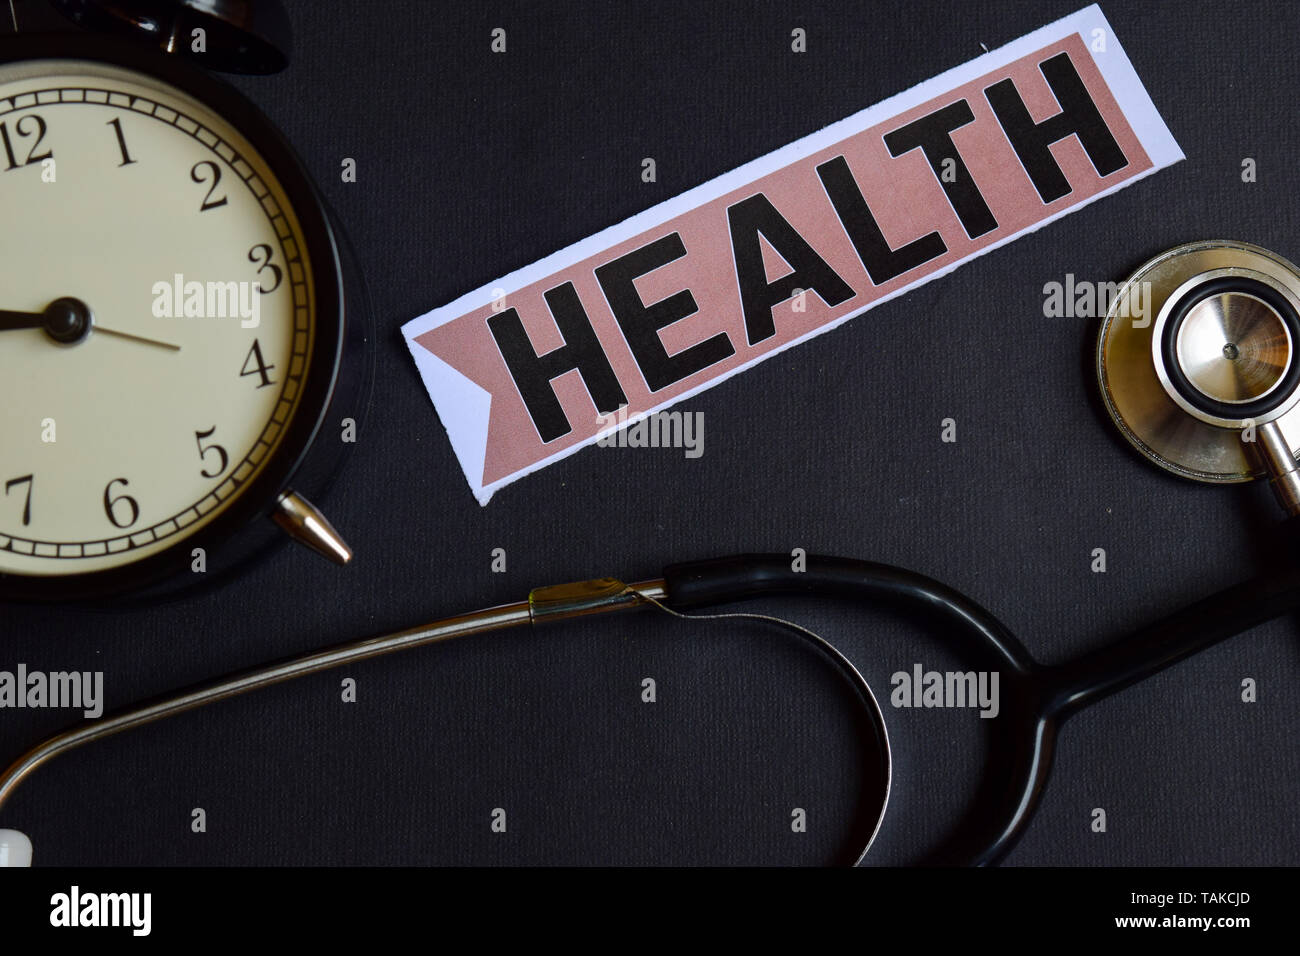 Health on the paper with Healthcare Concept Inspiration. alarm clock, Black stethoscope. Stock Photo